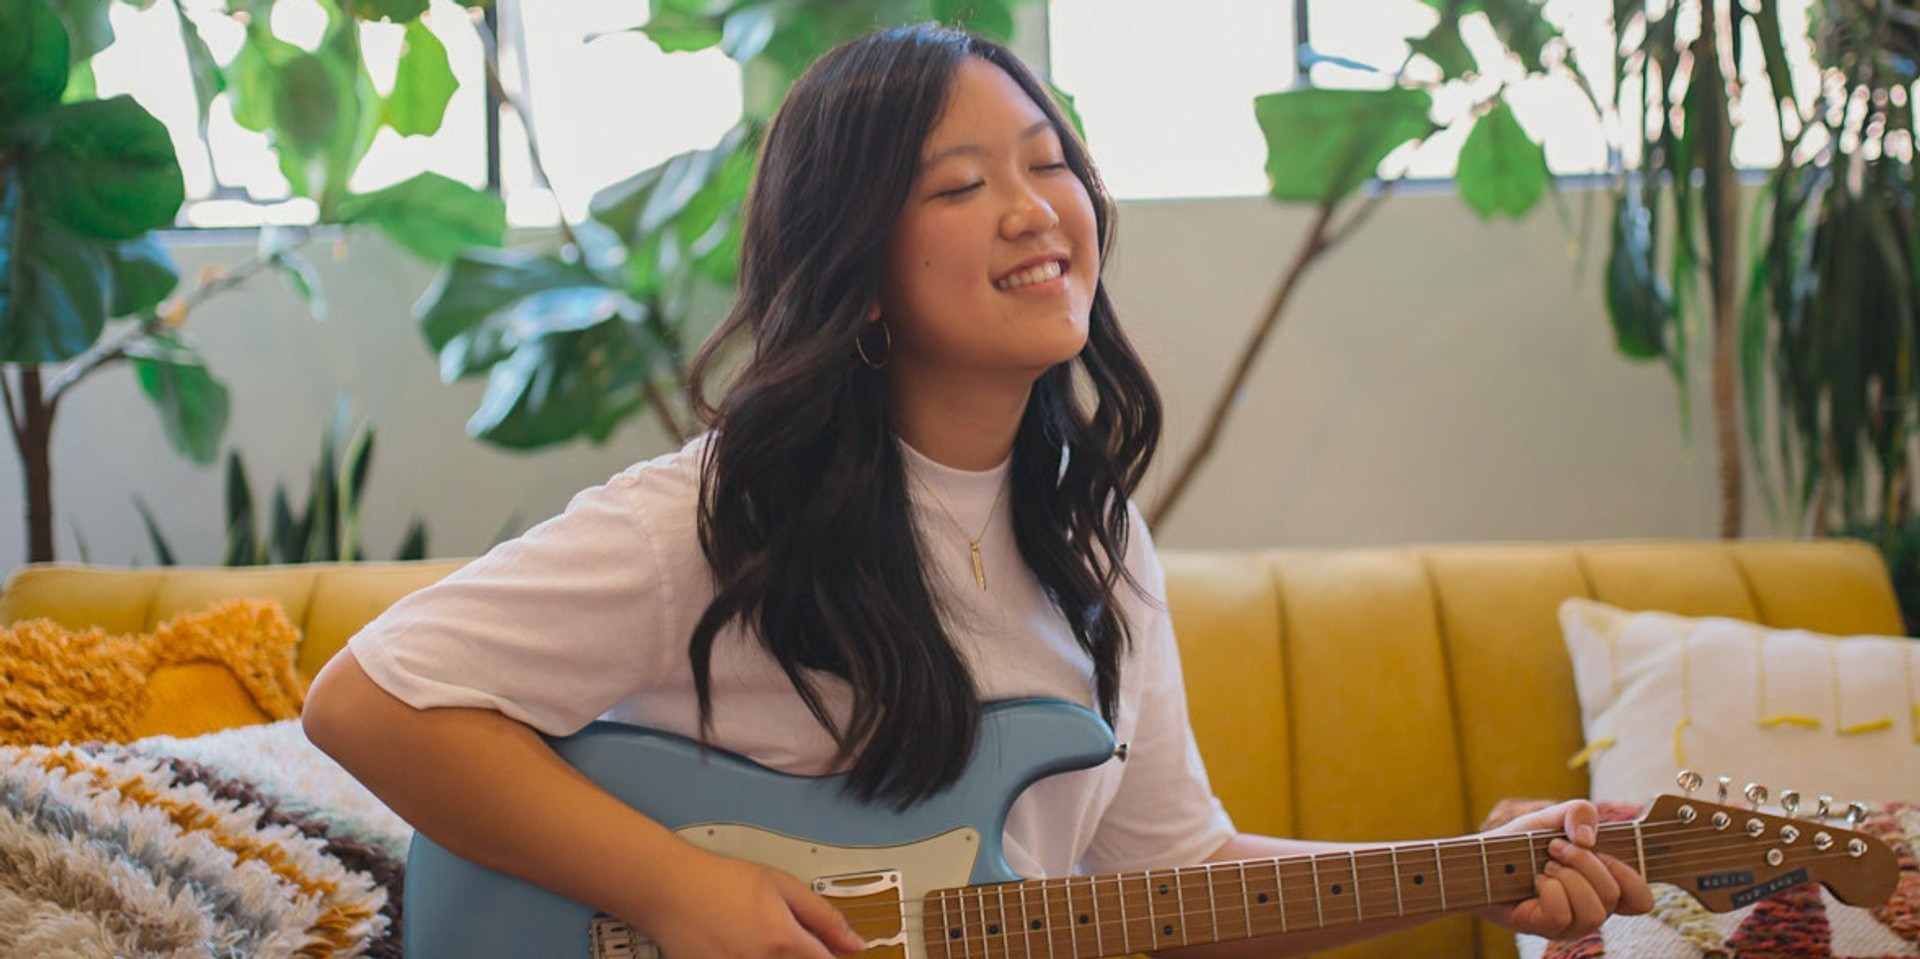 Meet Tiana Ohara, the 22-year-old guitarist who’s ready to conquer the world